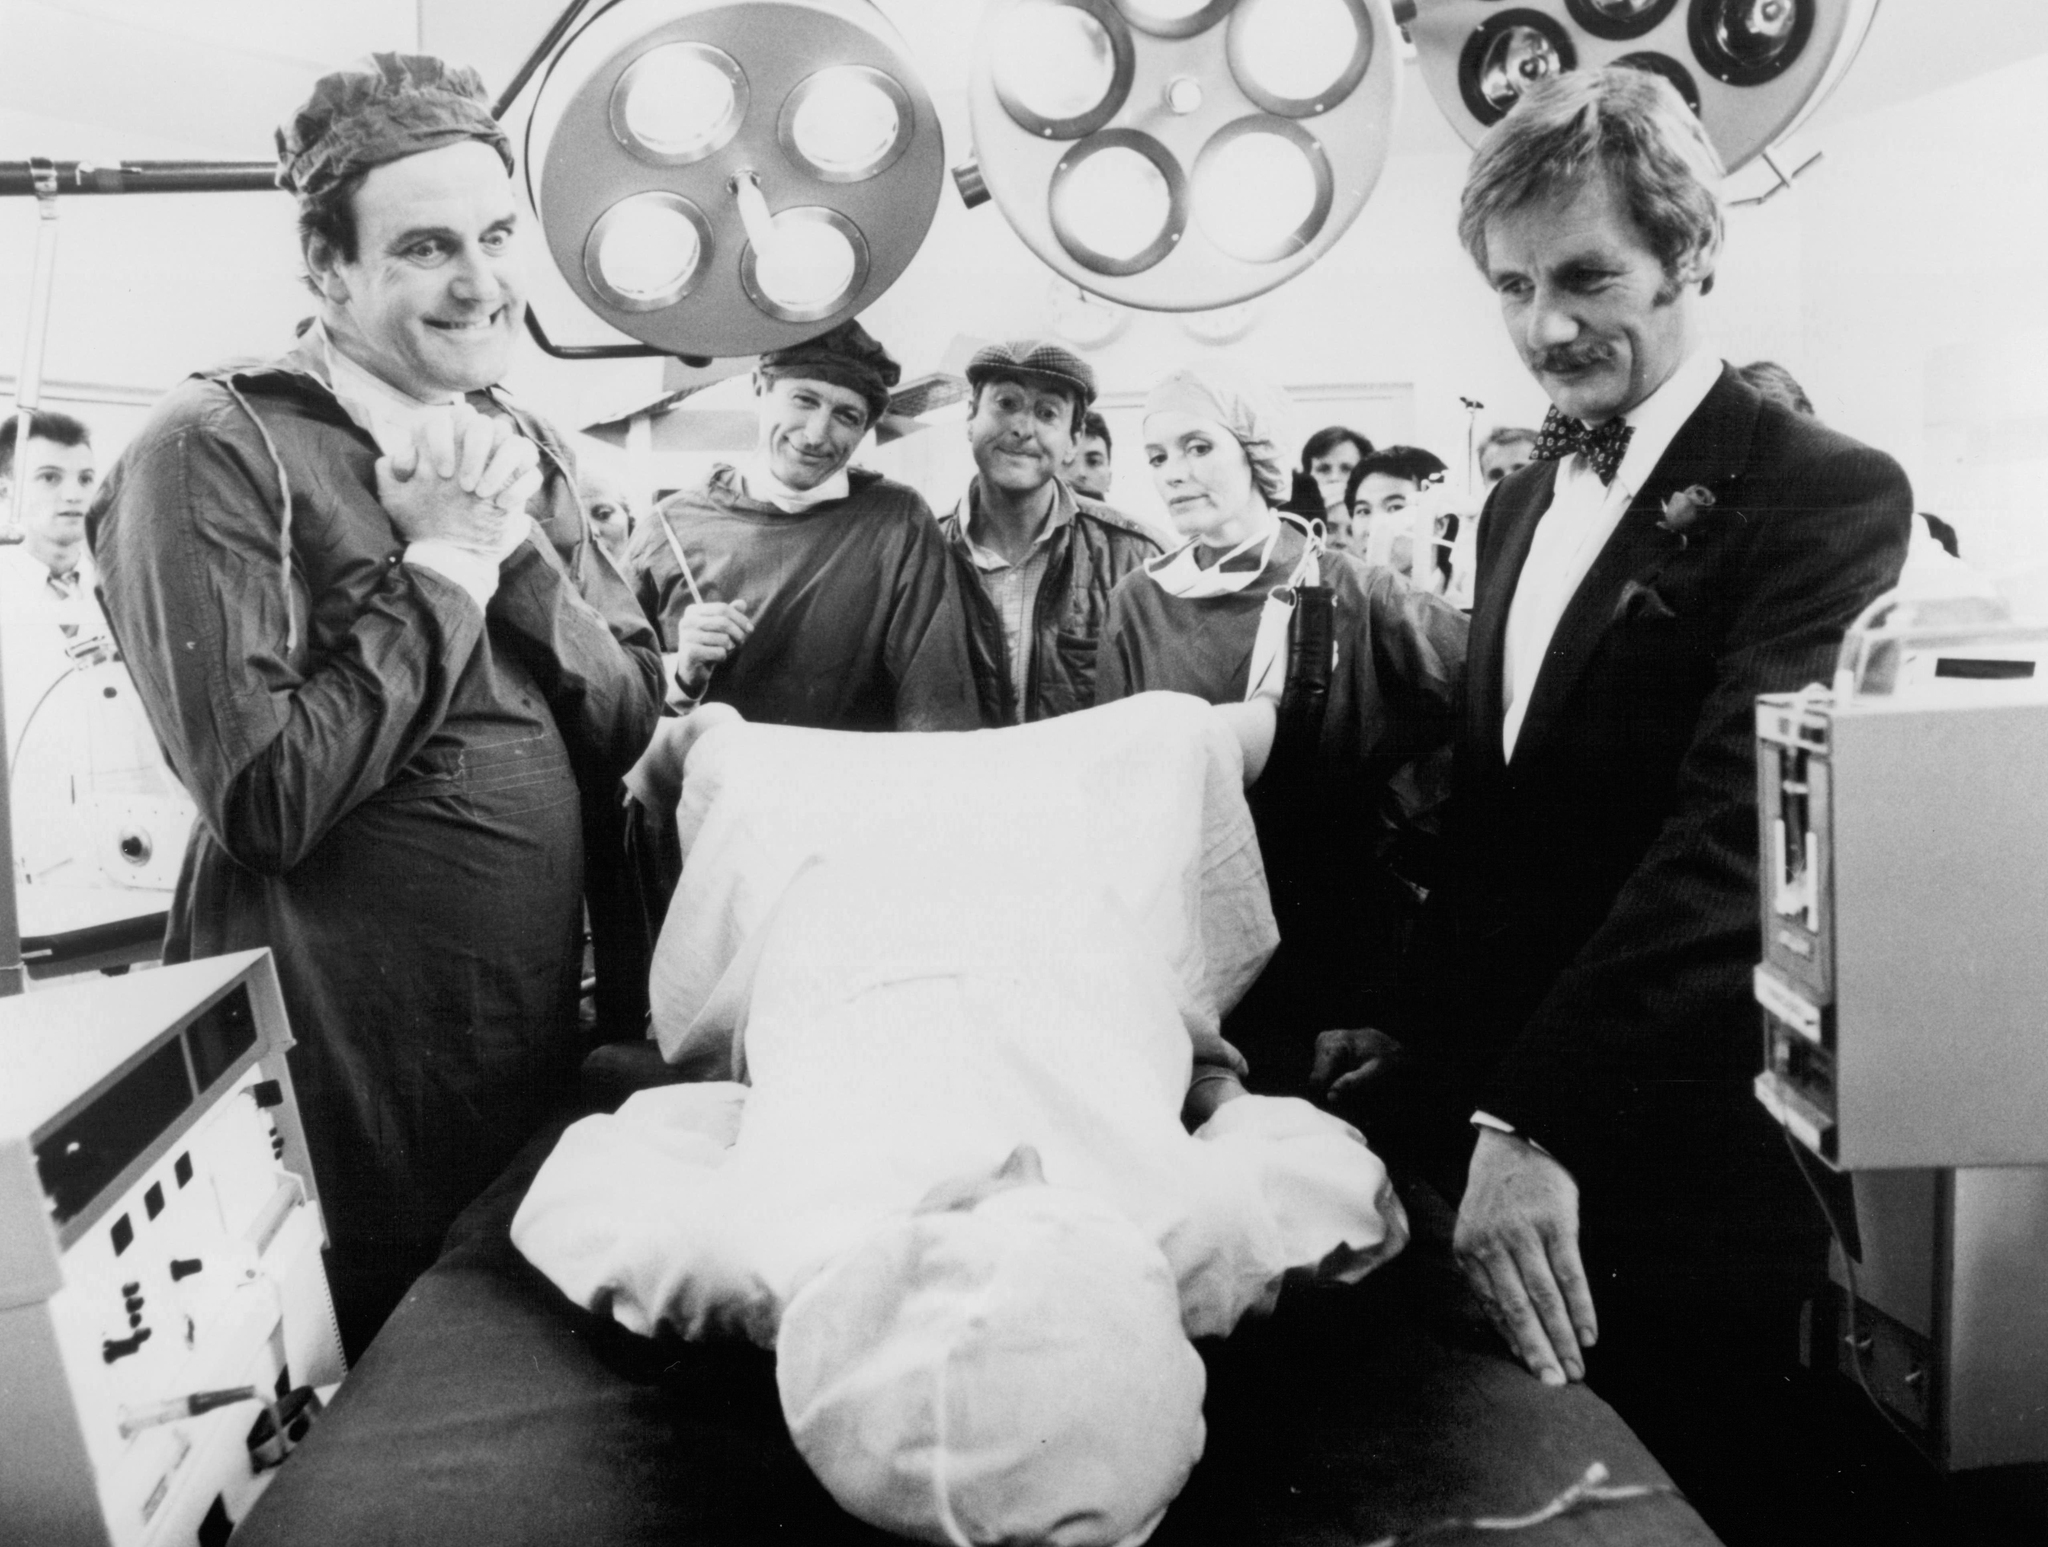 Still of John Cleese, Graham Chapman, Eric Idle and Michael Palin in The Meaning of Life (1983)